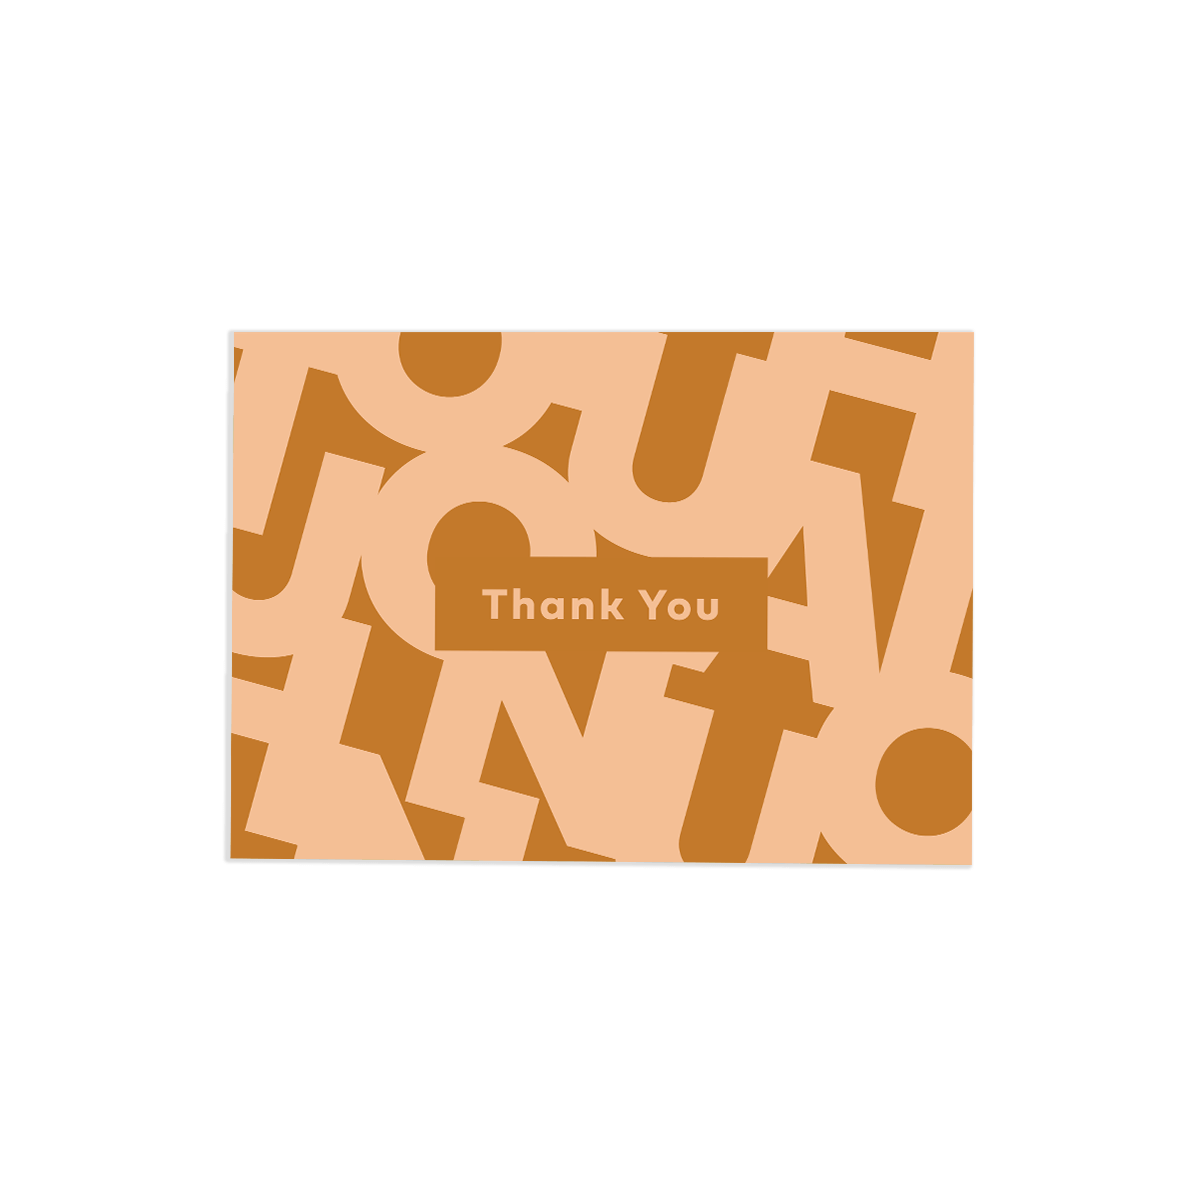 brown and tan colored Thank you greeting card thank reads "thank you" and has the letter's of "Thank you" in the background'